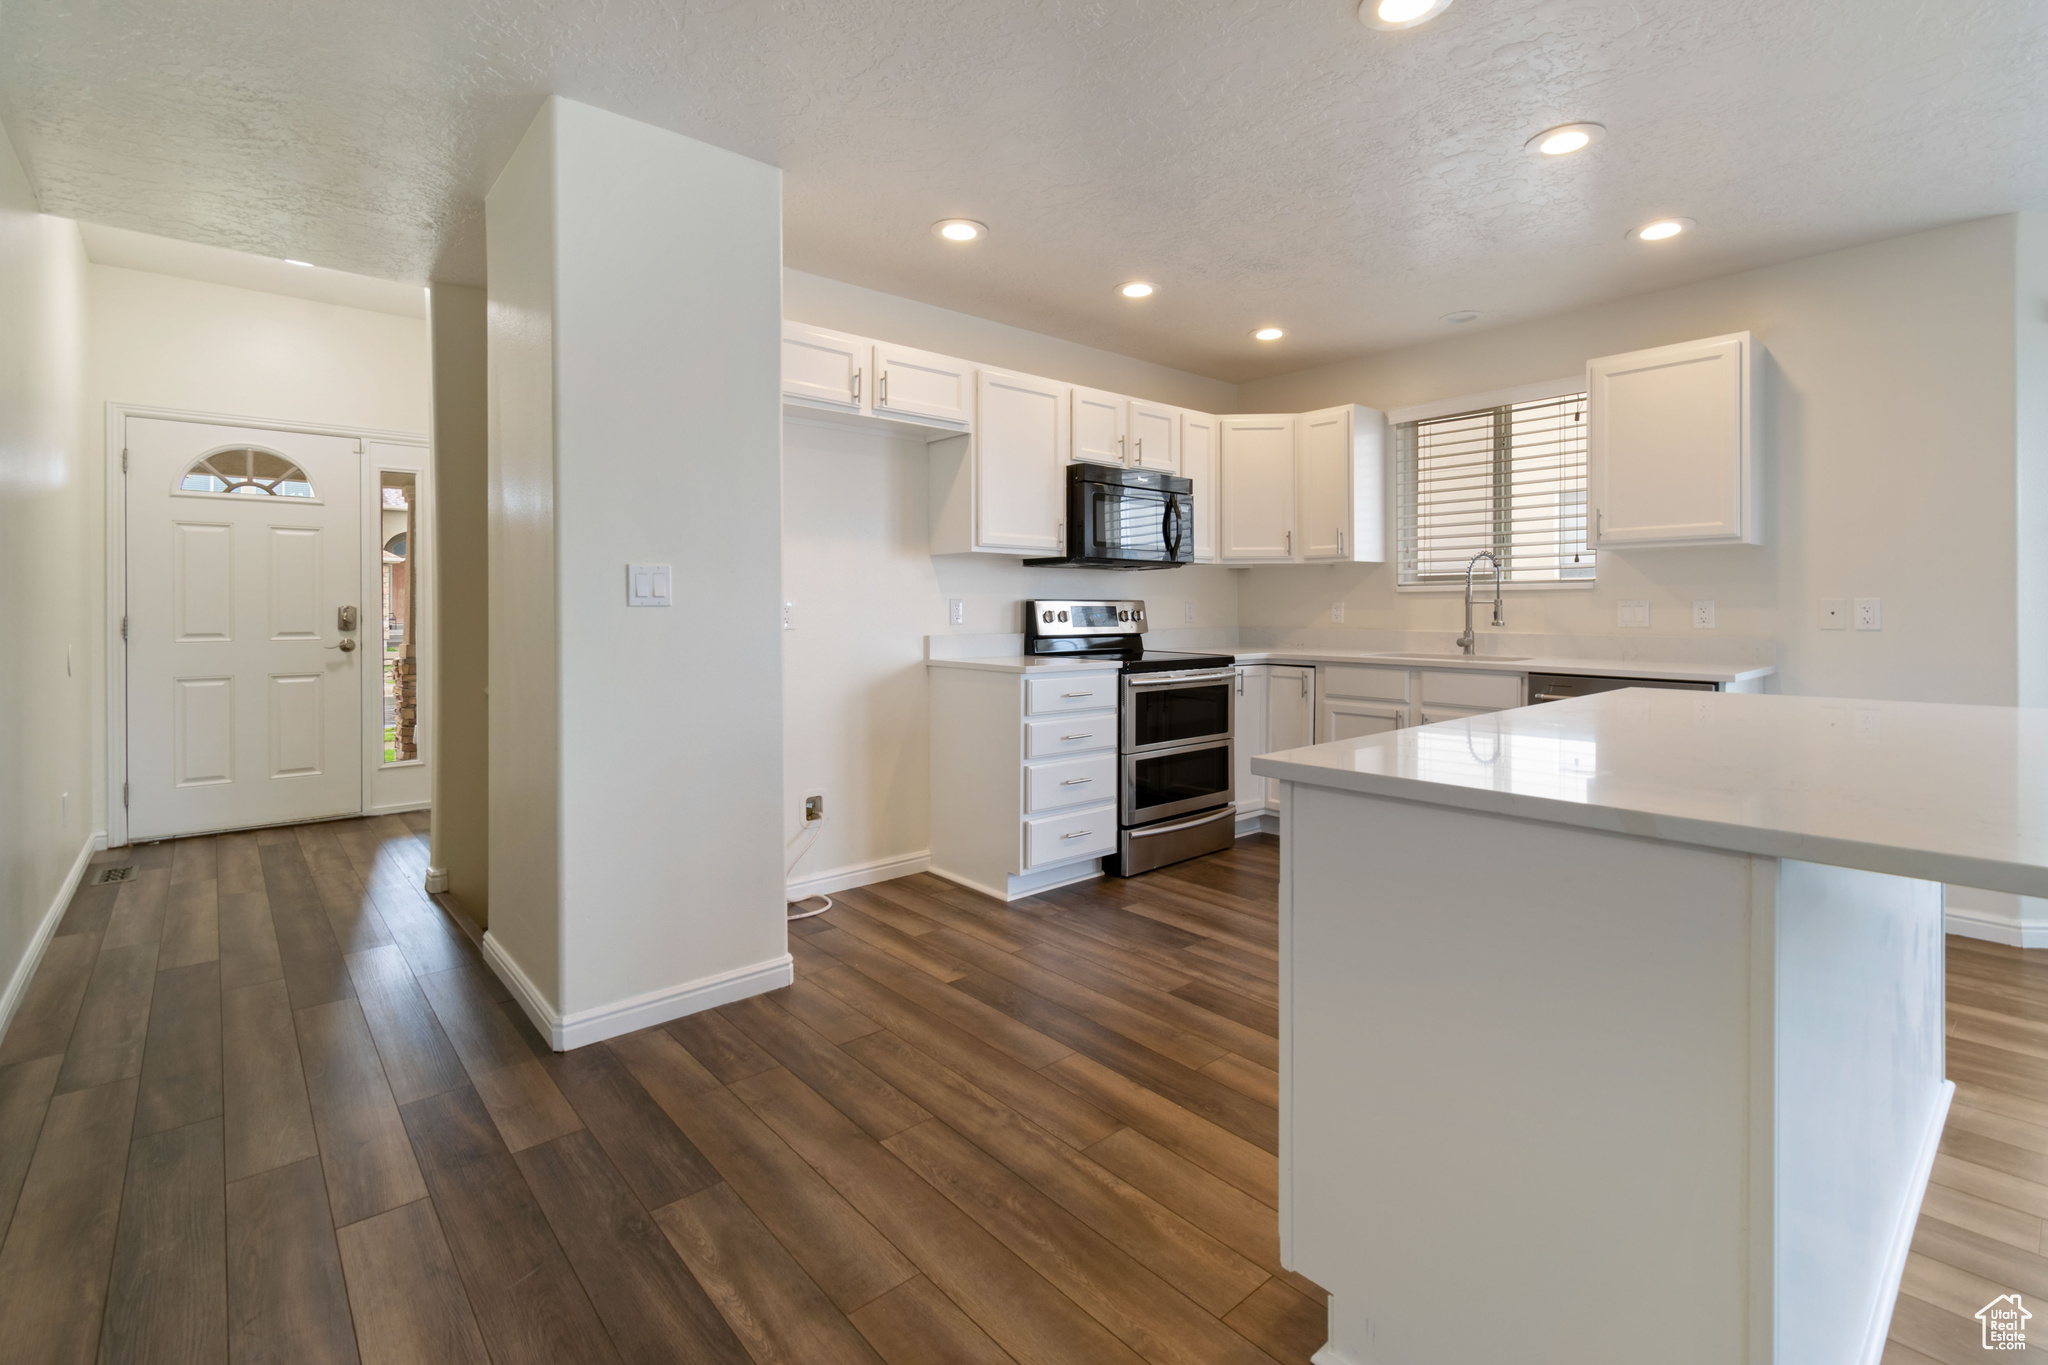 Kitchen featuring sink, white cabinetry, dark hardwood / wood-style floors, and double oven range